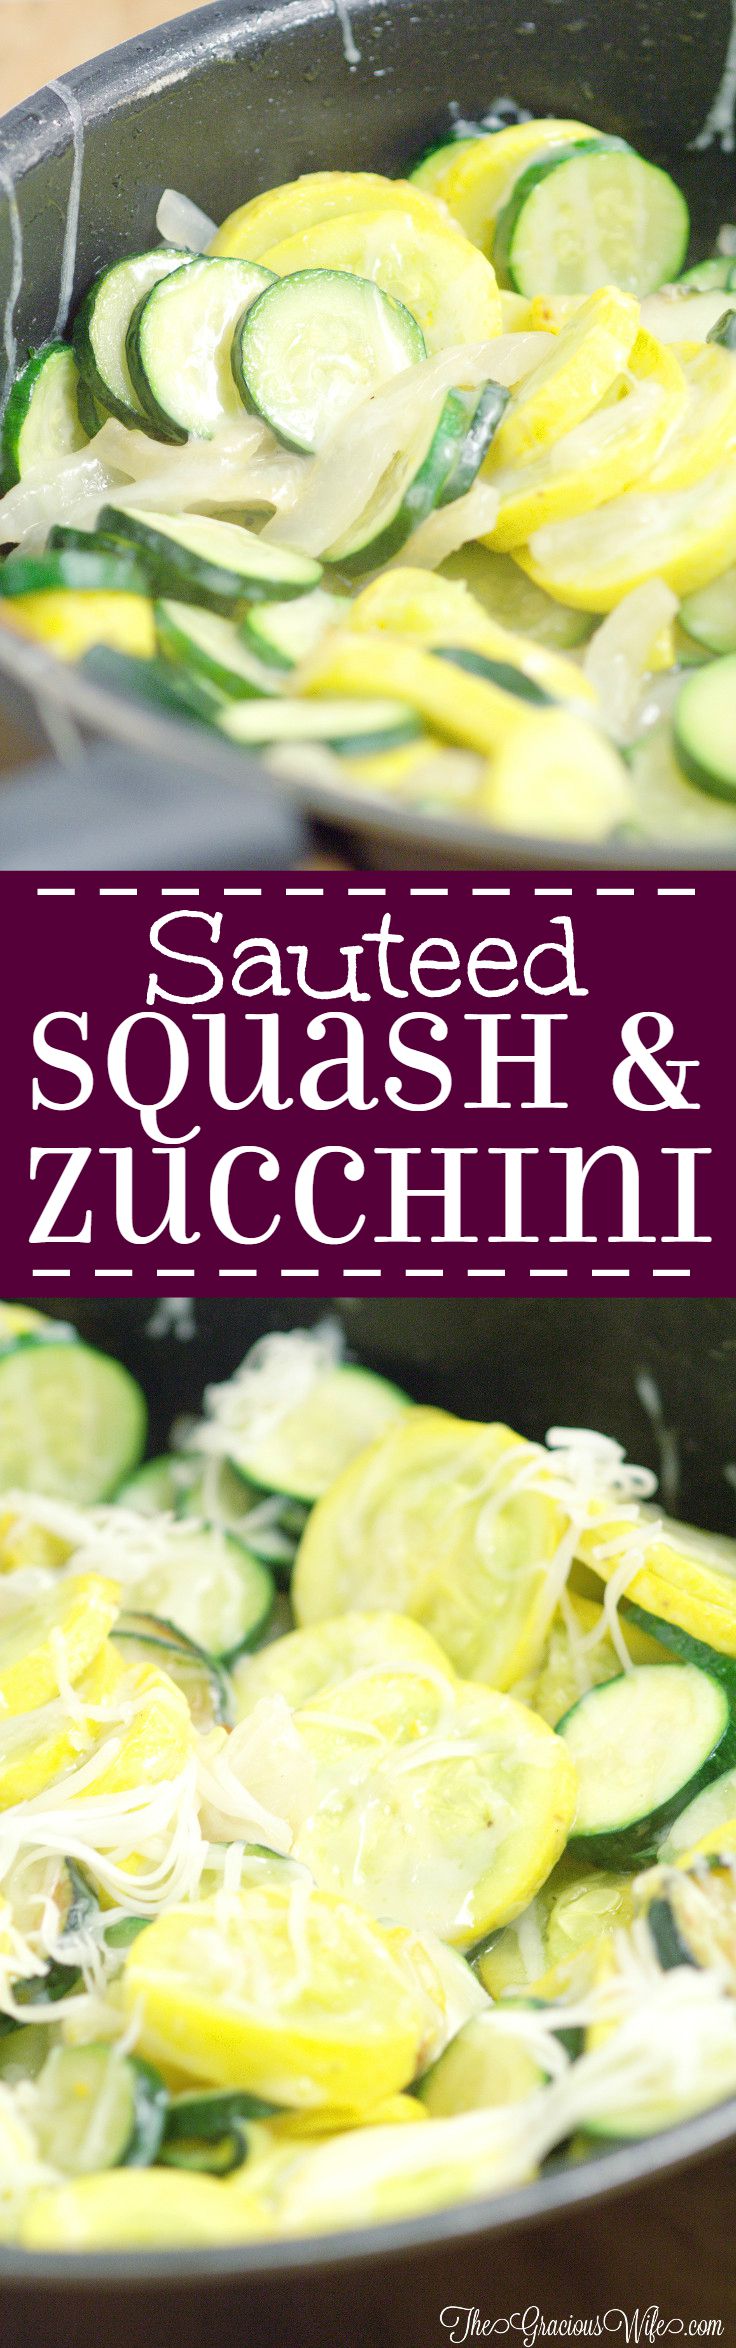 Sauteed Squash and Zucchini Recipe - an easy summer vegetable side dish recipe. A combination of summer squash, zucchini, sweet onions, and garlic, quickly sauteed together and topped with cheese for a fast and delicious summer side dish. This is one of my Summer favorites! It's even better when the sauteed squash and zucchini are fresh from the garden!